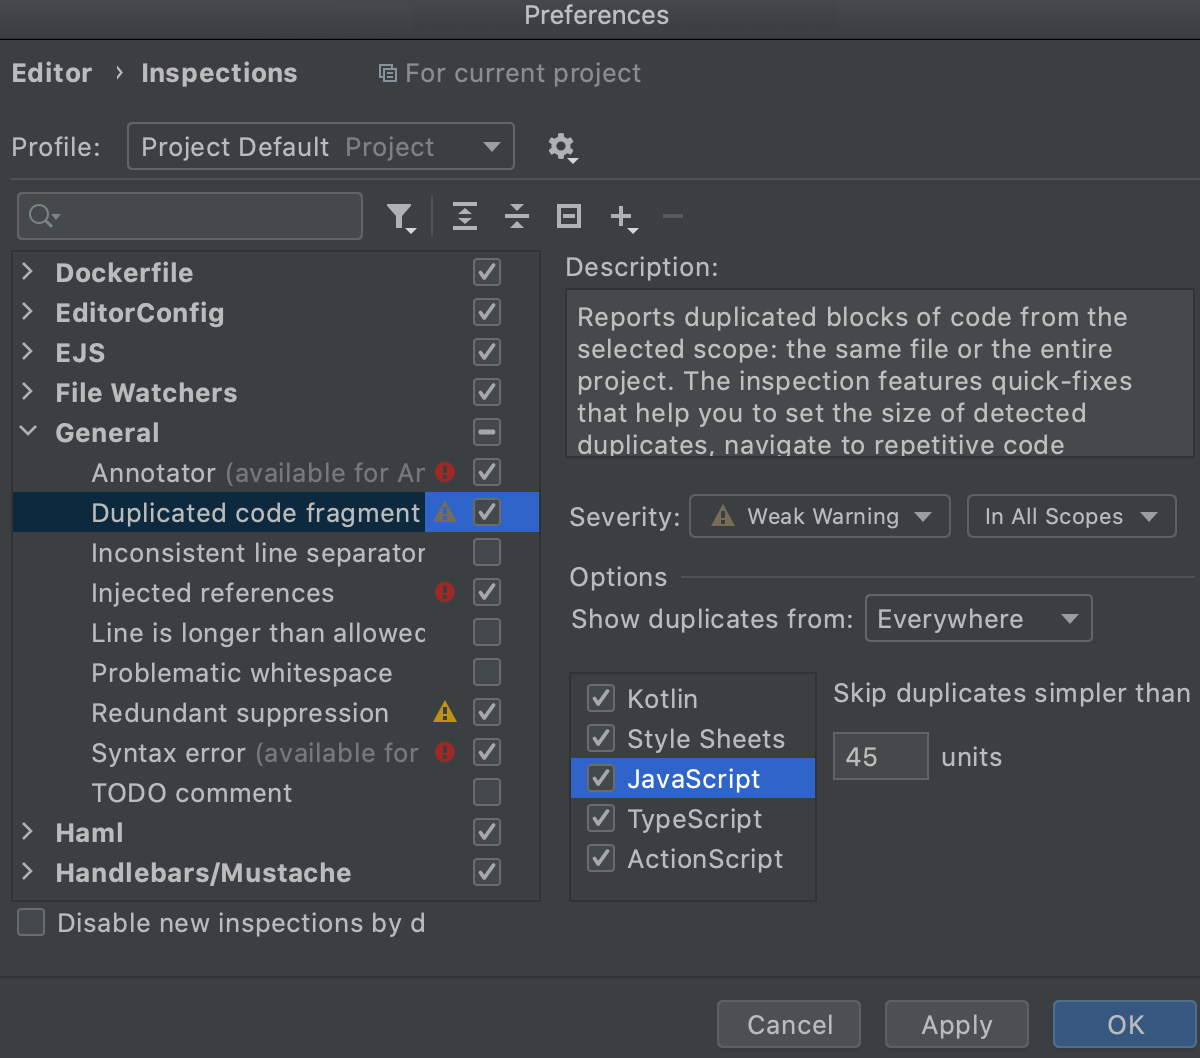 Duplicated Code Fragment inspection settings